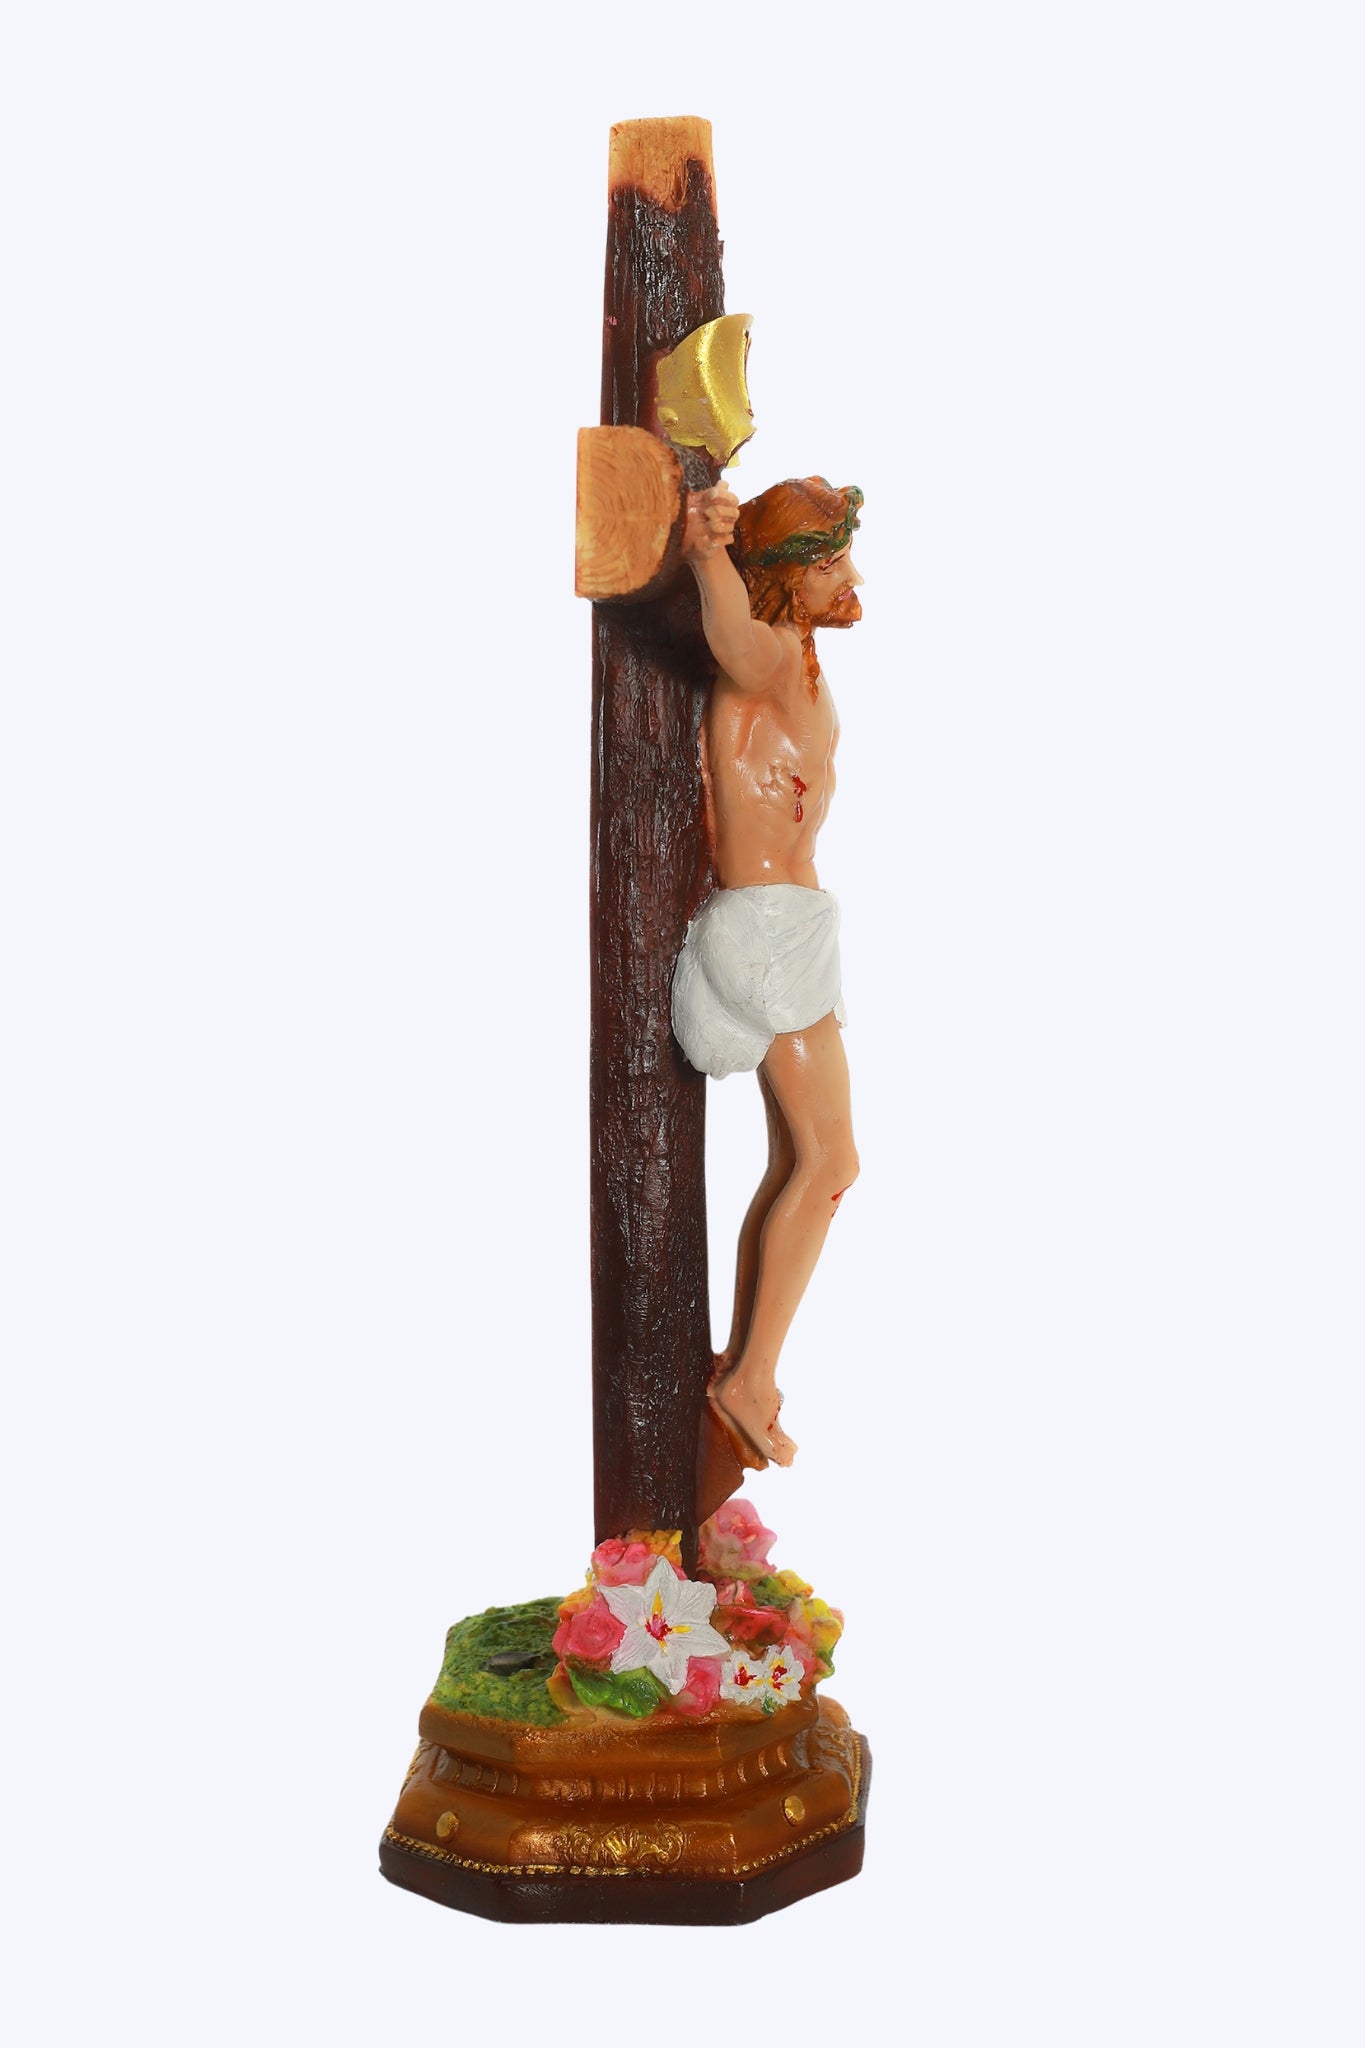 Shop Exquisite 20 Inch Crucifix Statues on Living Words